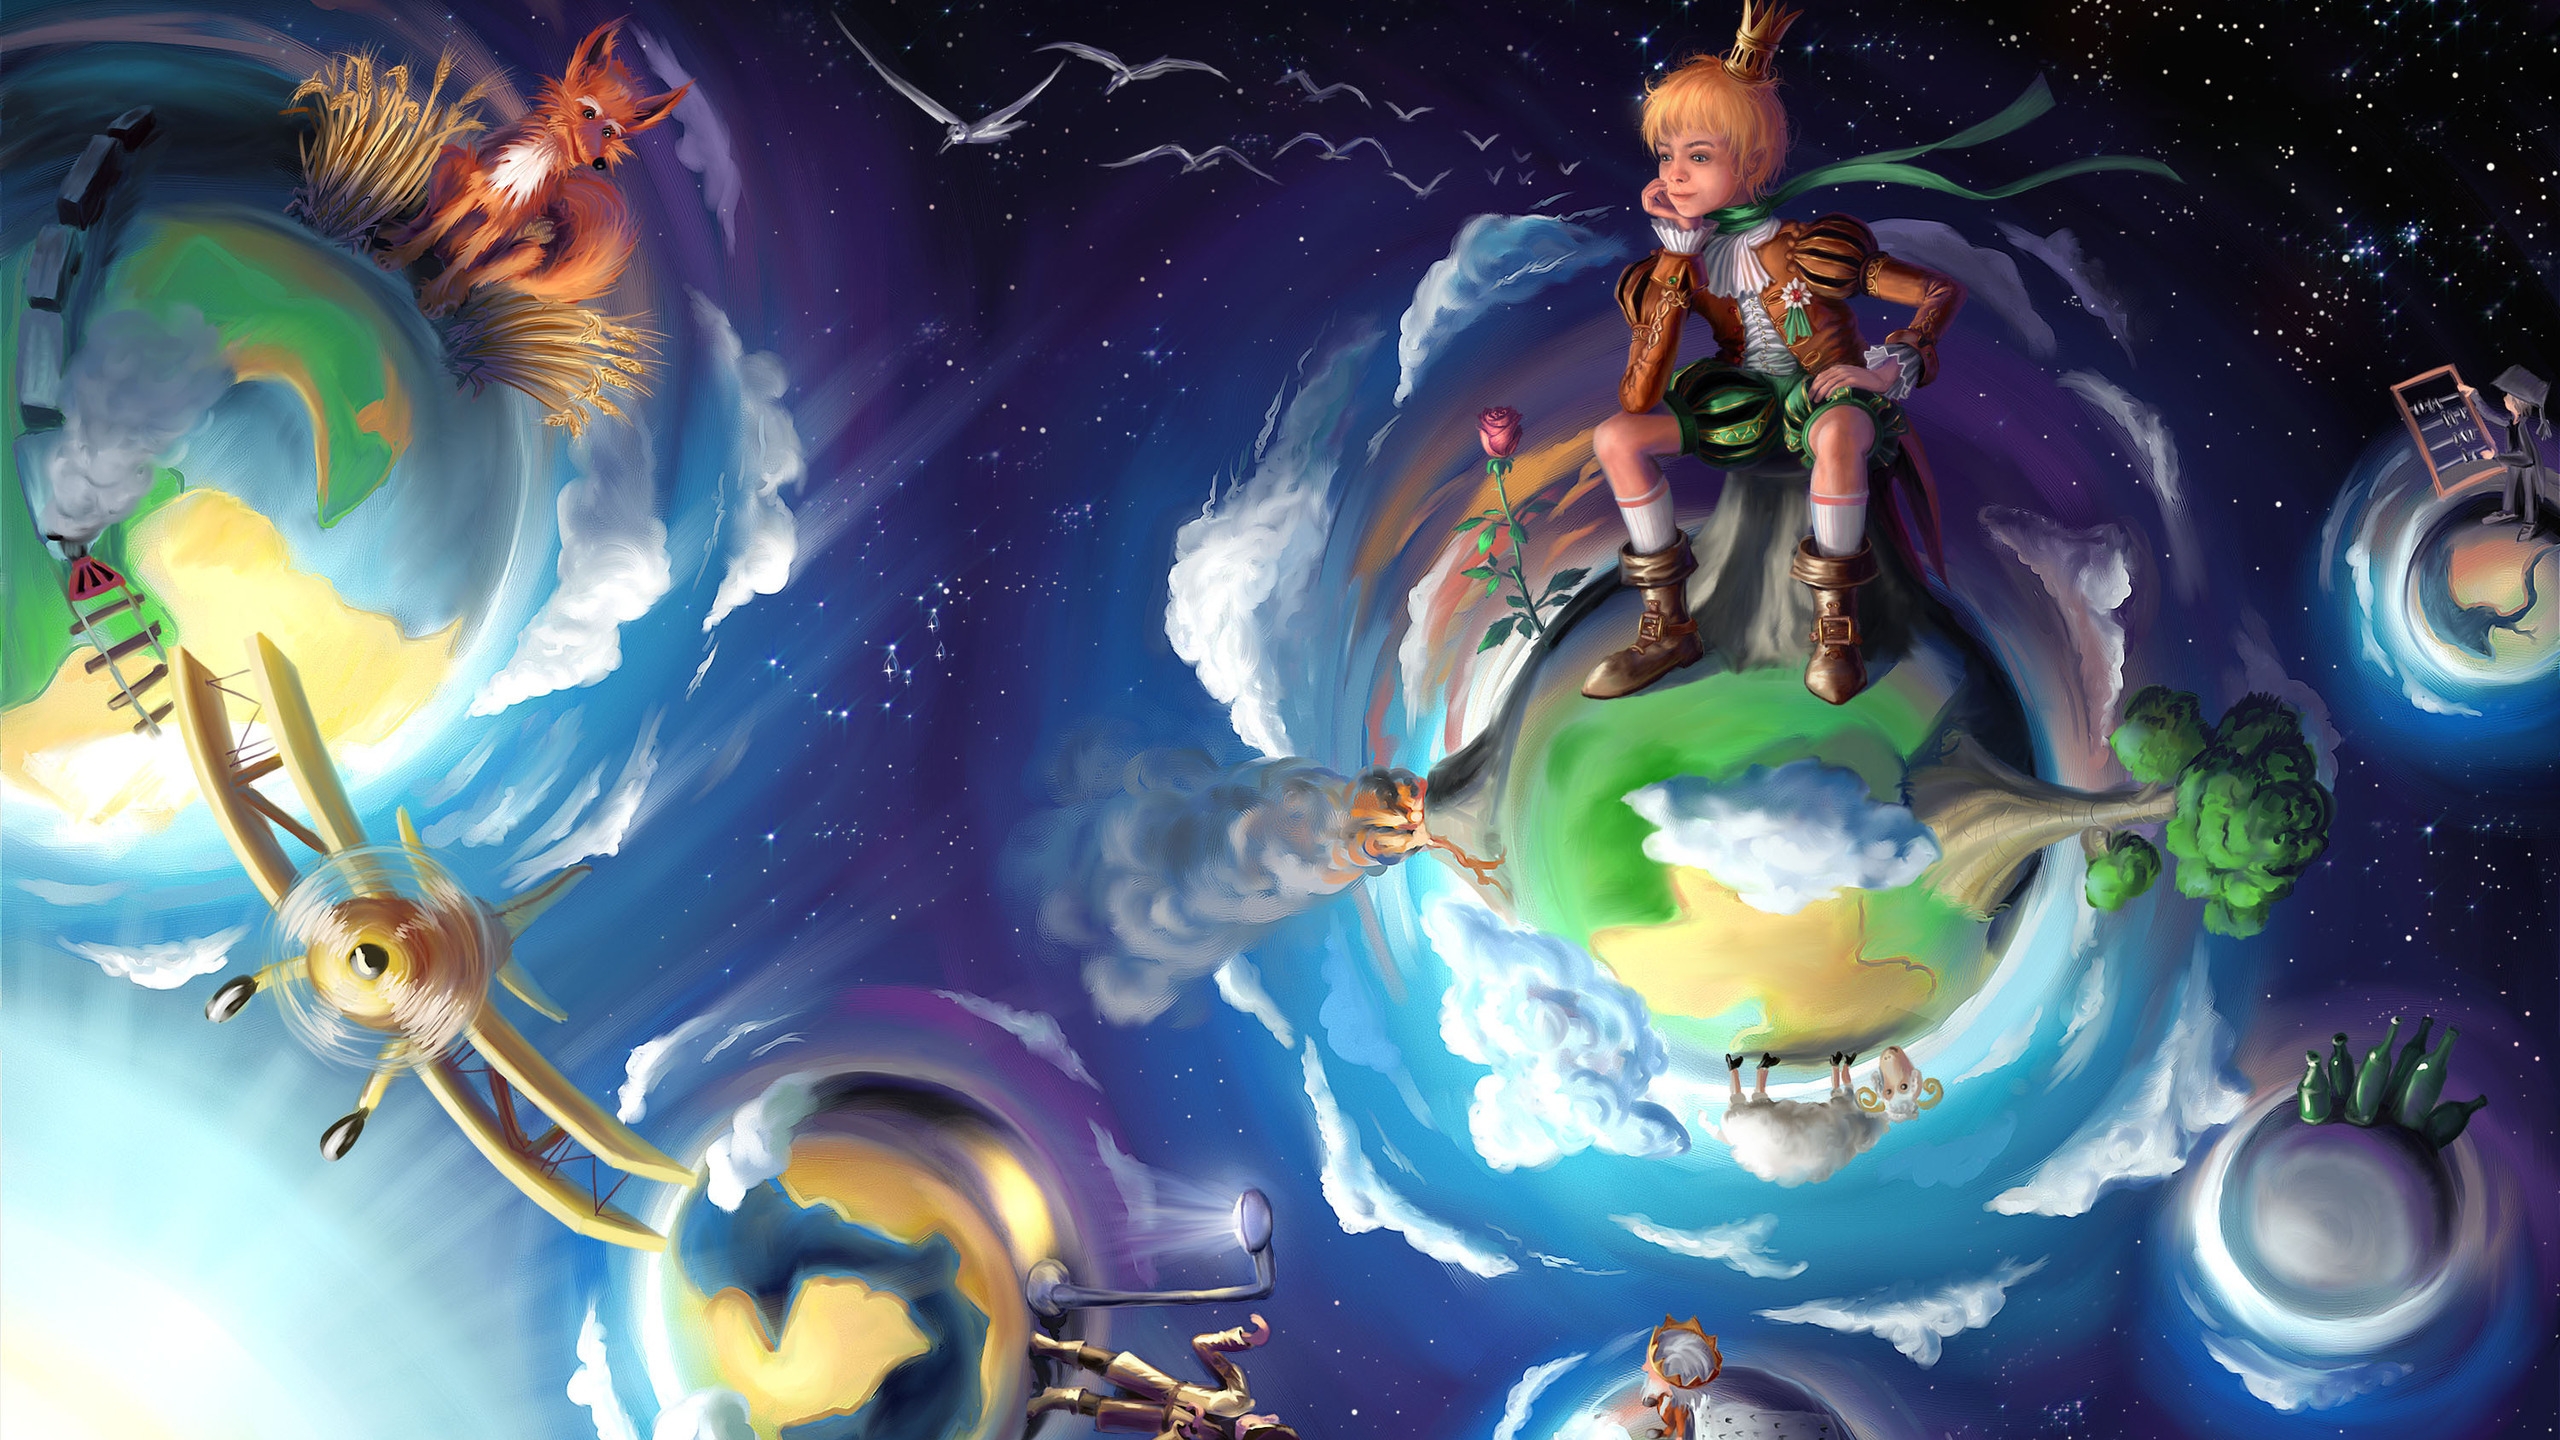 Little Prince for 2560x1440 HDTV resolution